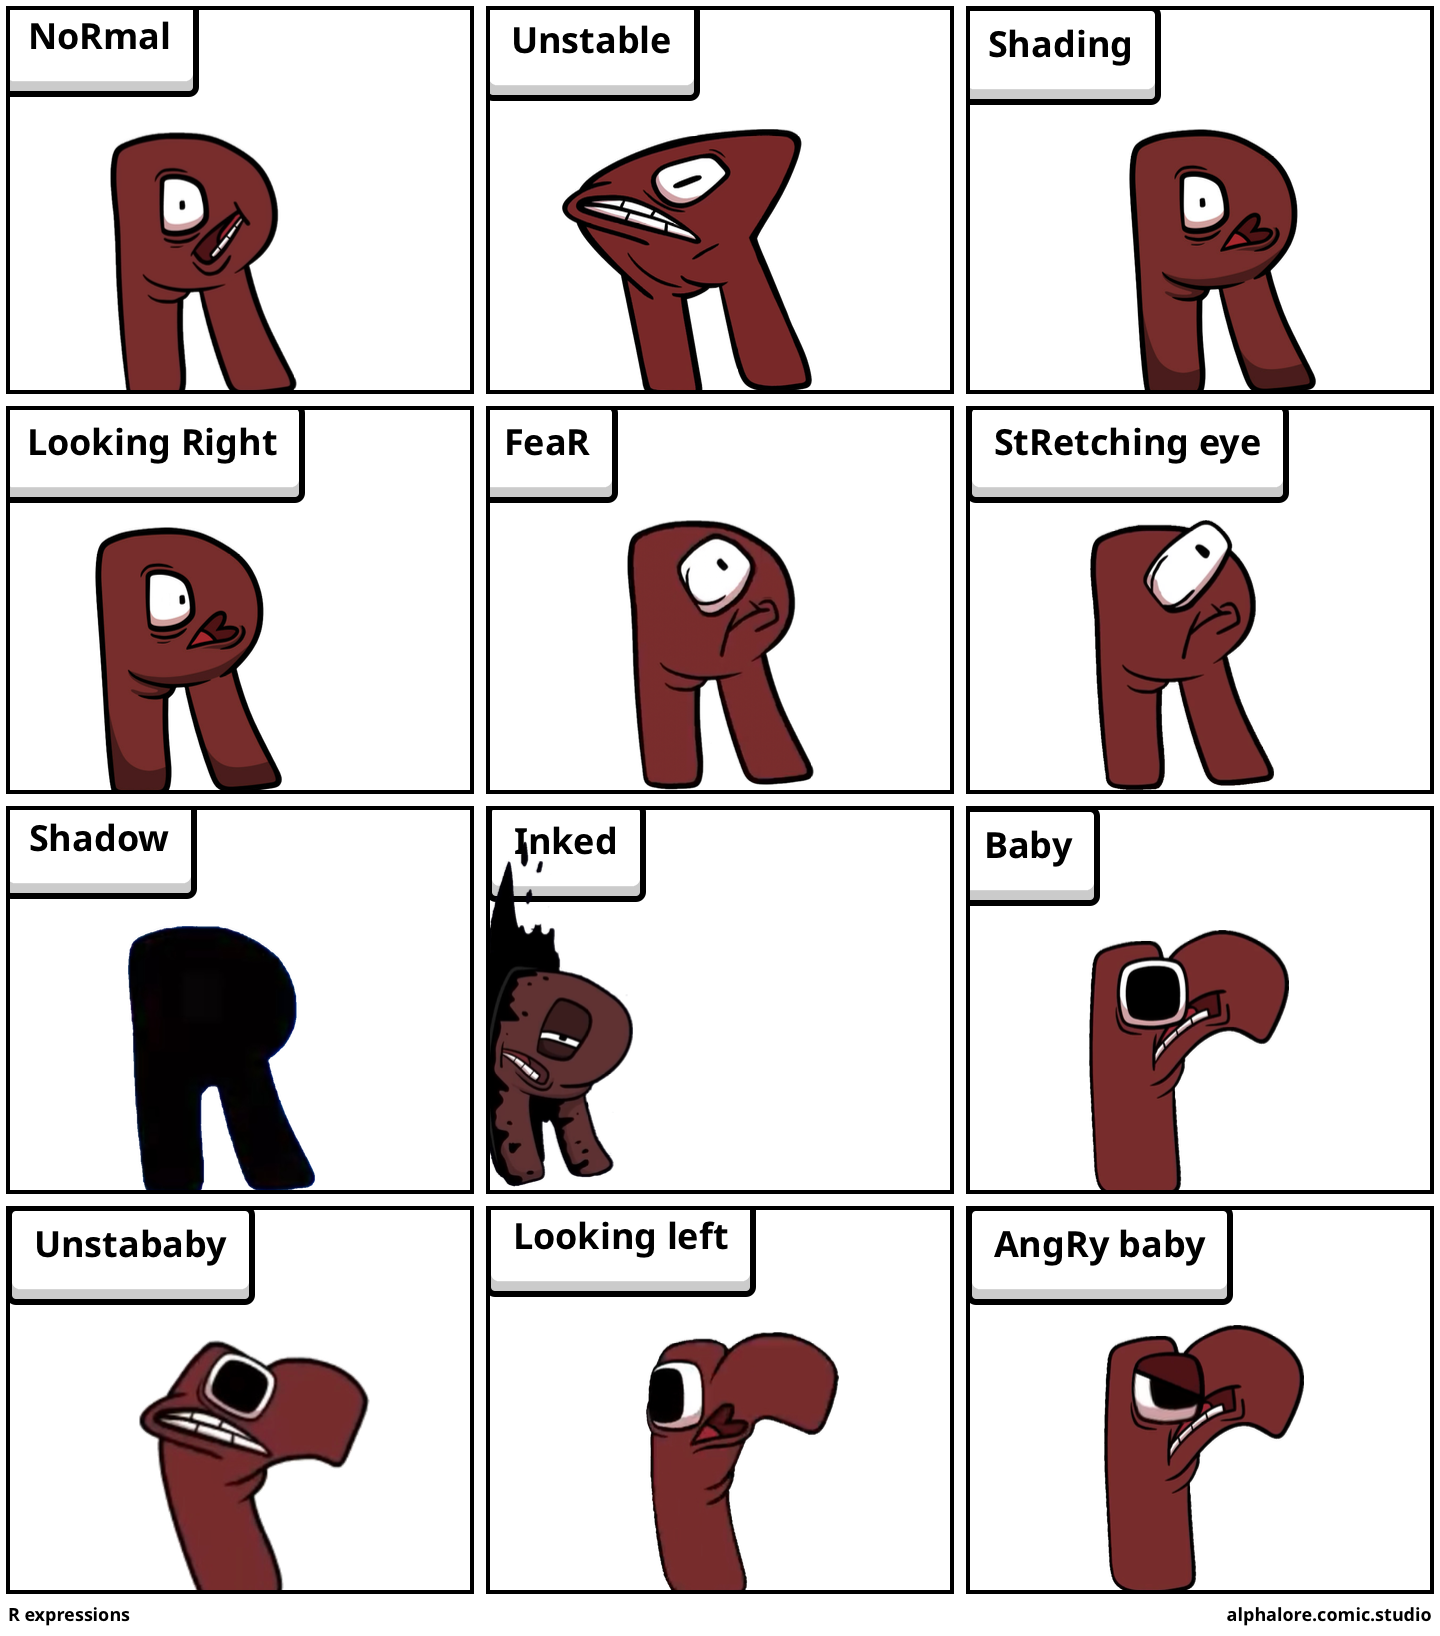 R expressions